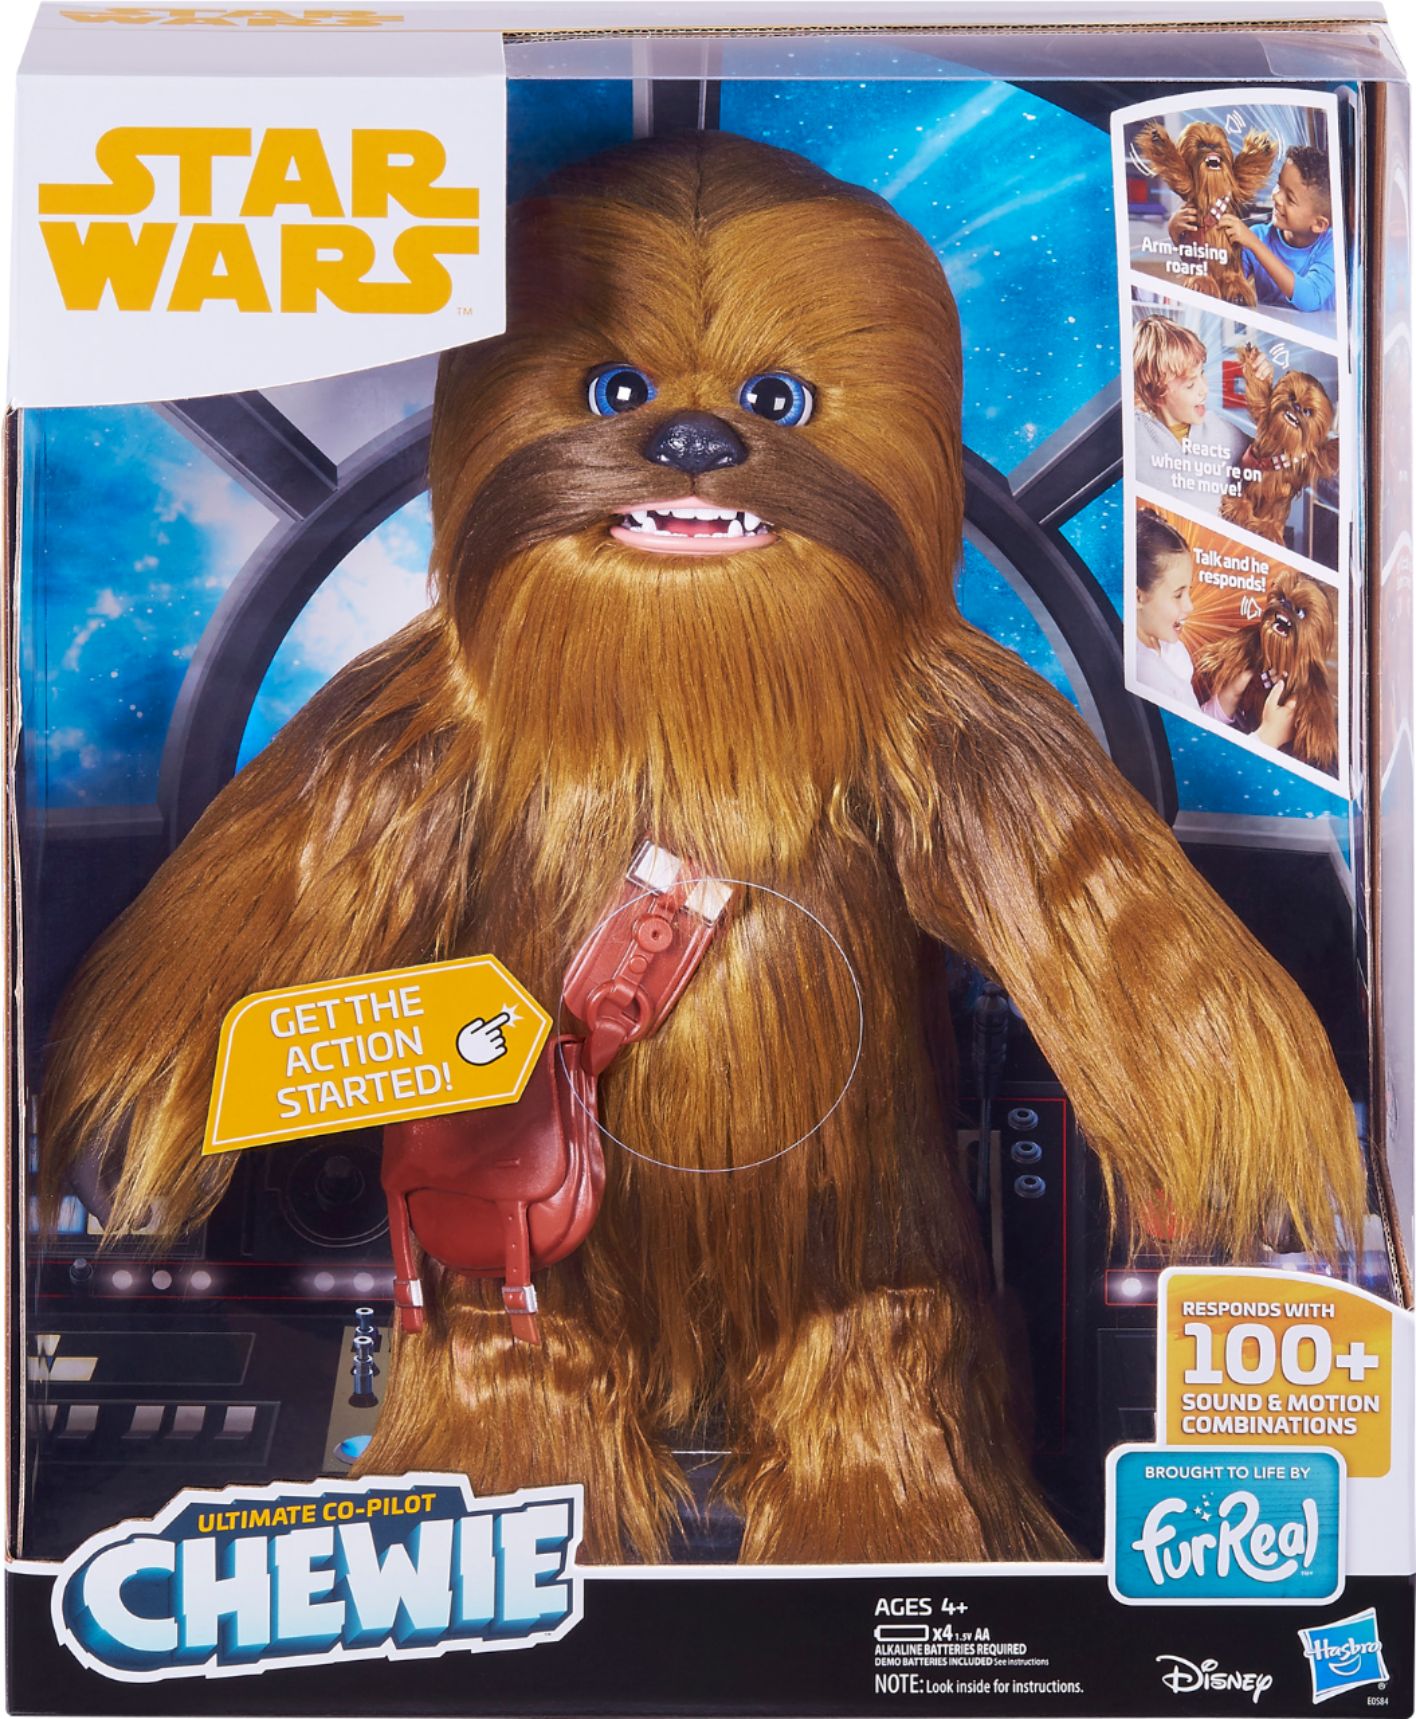 Star Wars Ultimate Co-pilot Chewie Action Figure for sale online E0584 